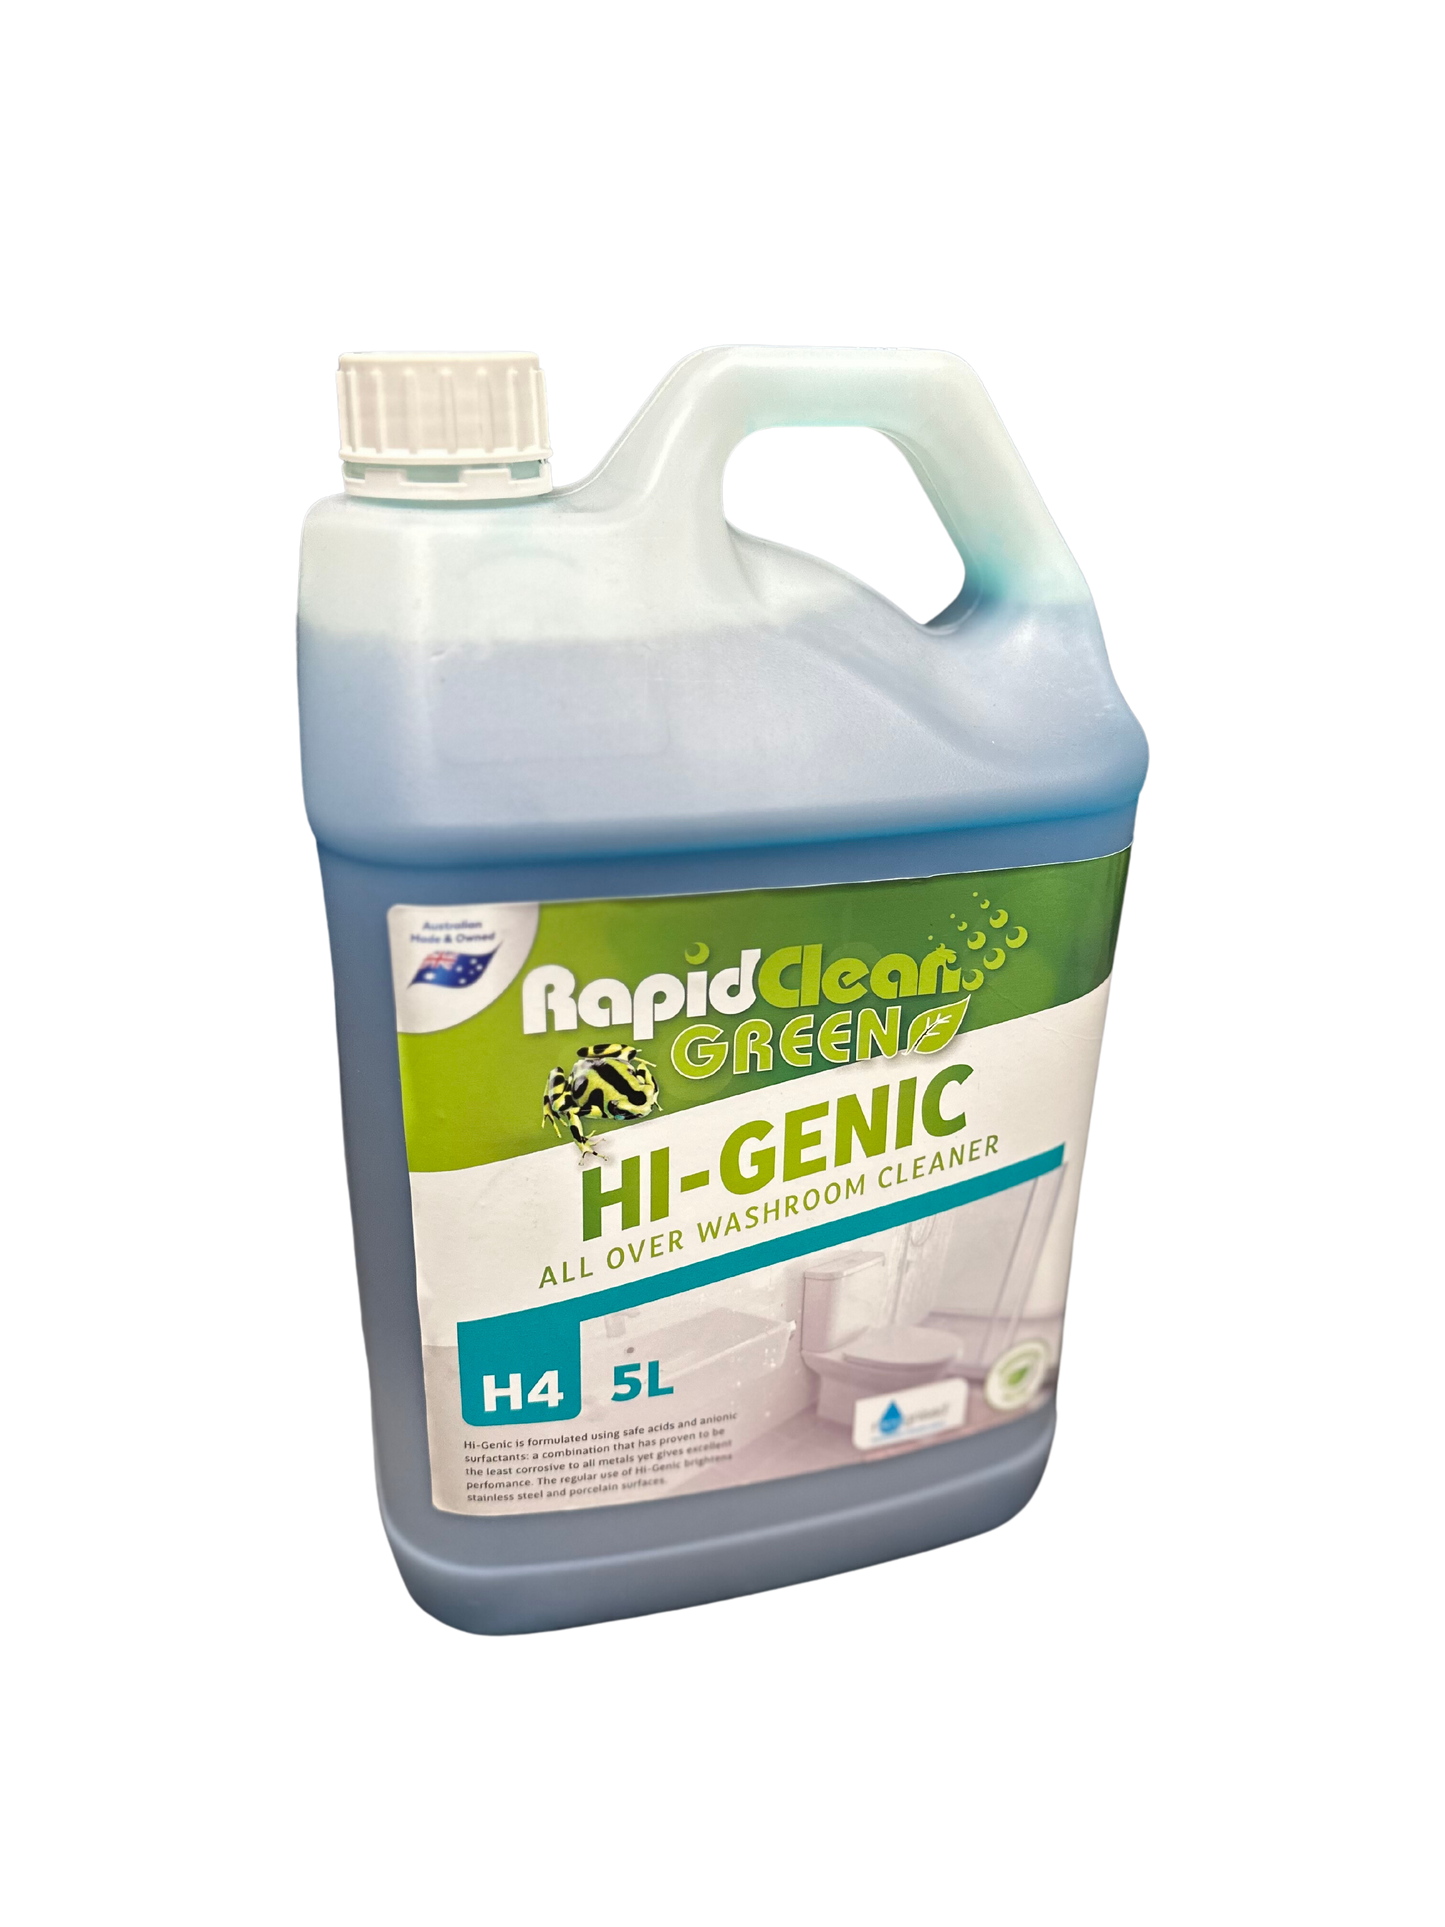 Hi-Genic is formulated using safe acids and anionic surfactants: a combination that has proven to be the least corrosive to all metals yet gives excellent performance. The regular use of Hi-Genic brightens stainless steel and porcelain surfaces. Mackay